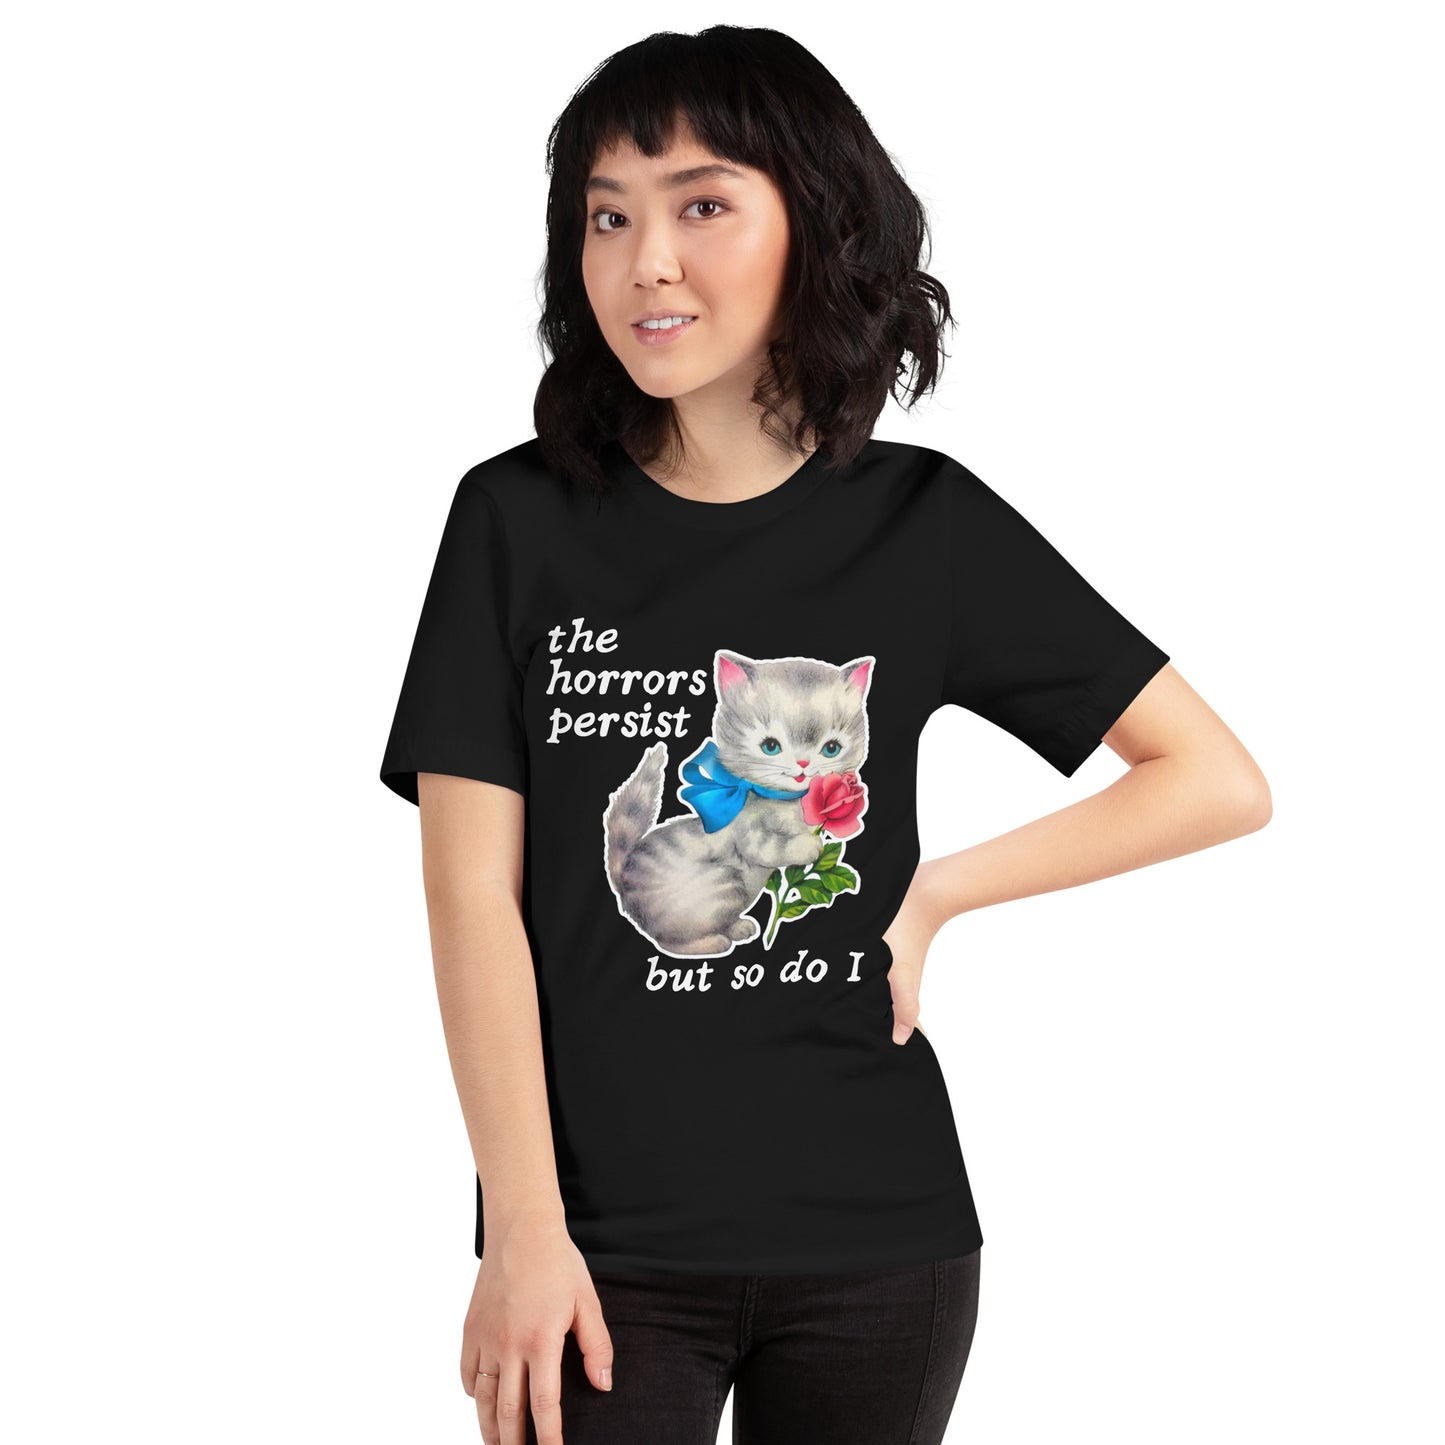 The Horrors Persist but So Do I Unisex Shirt